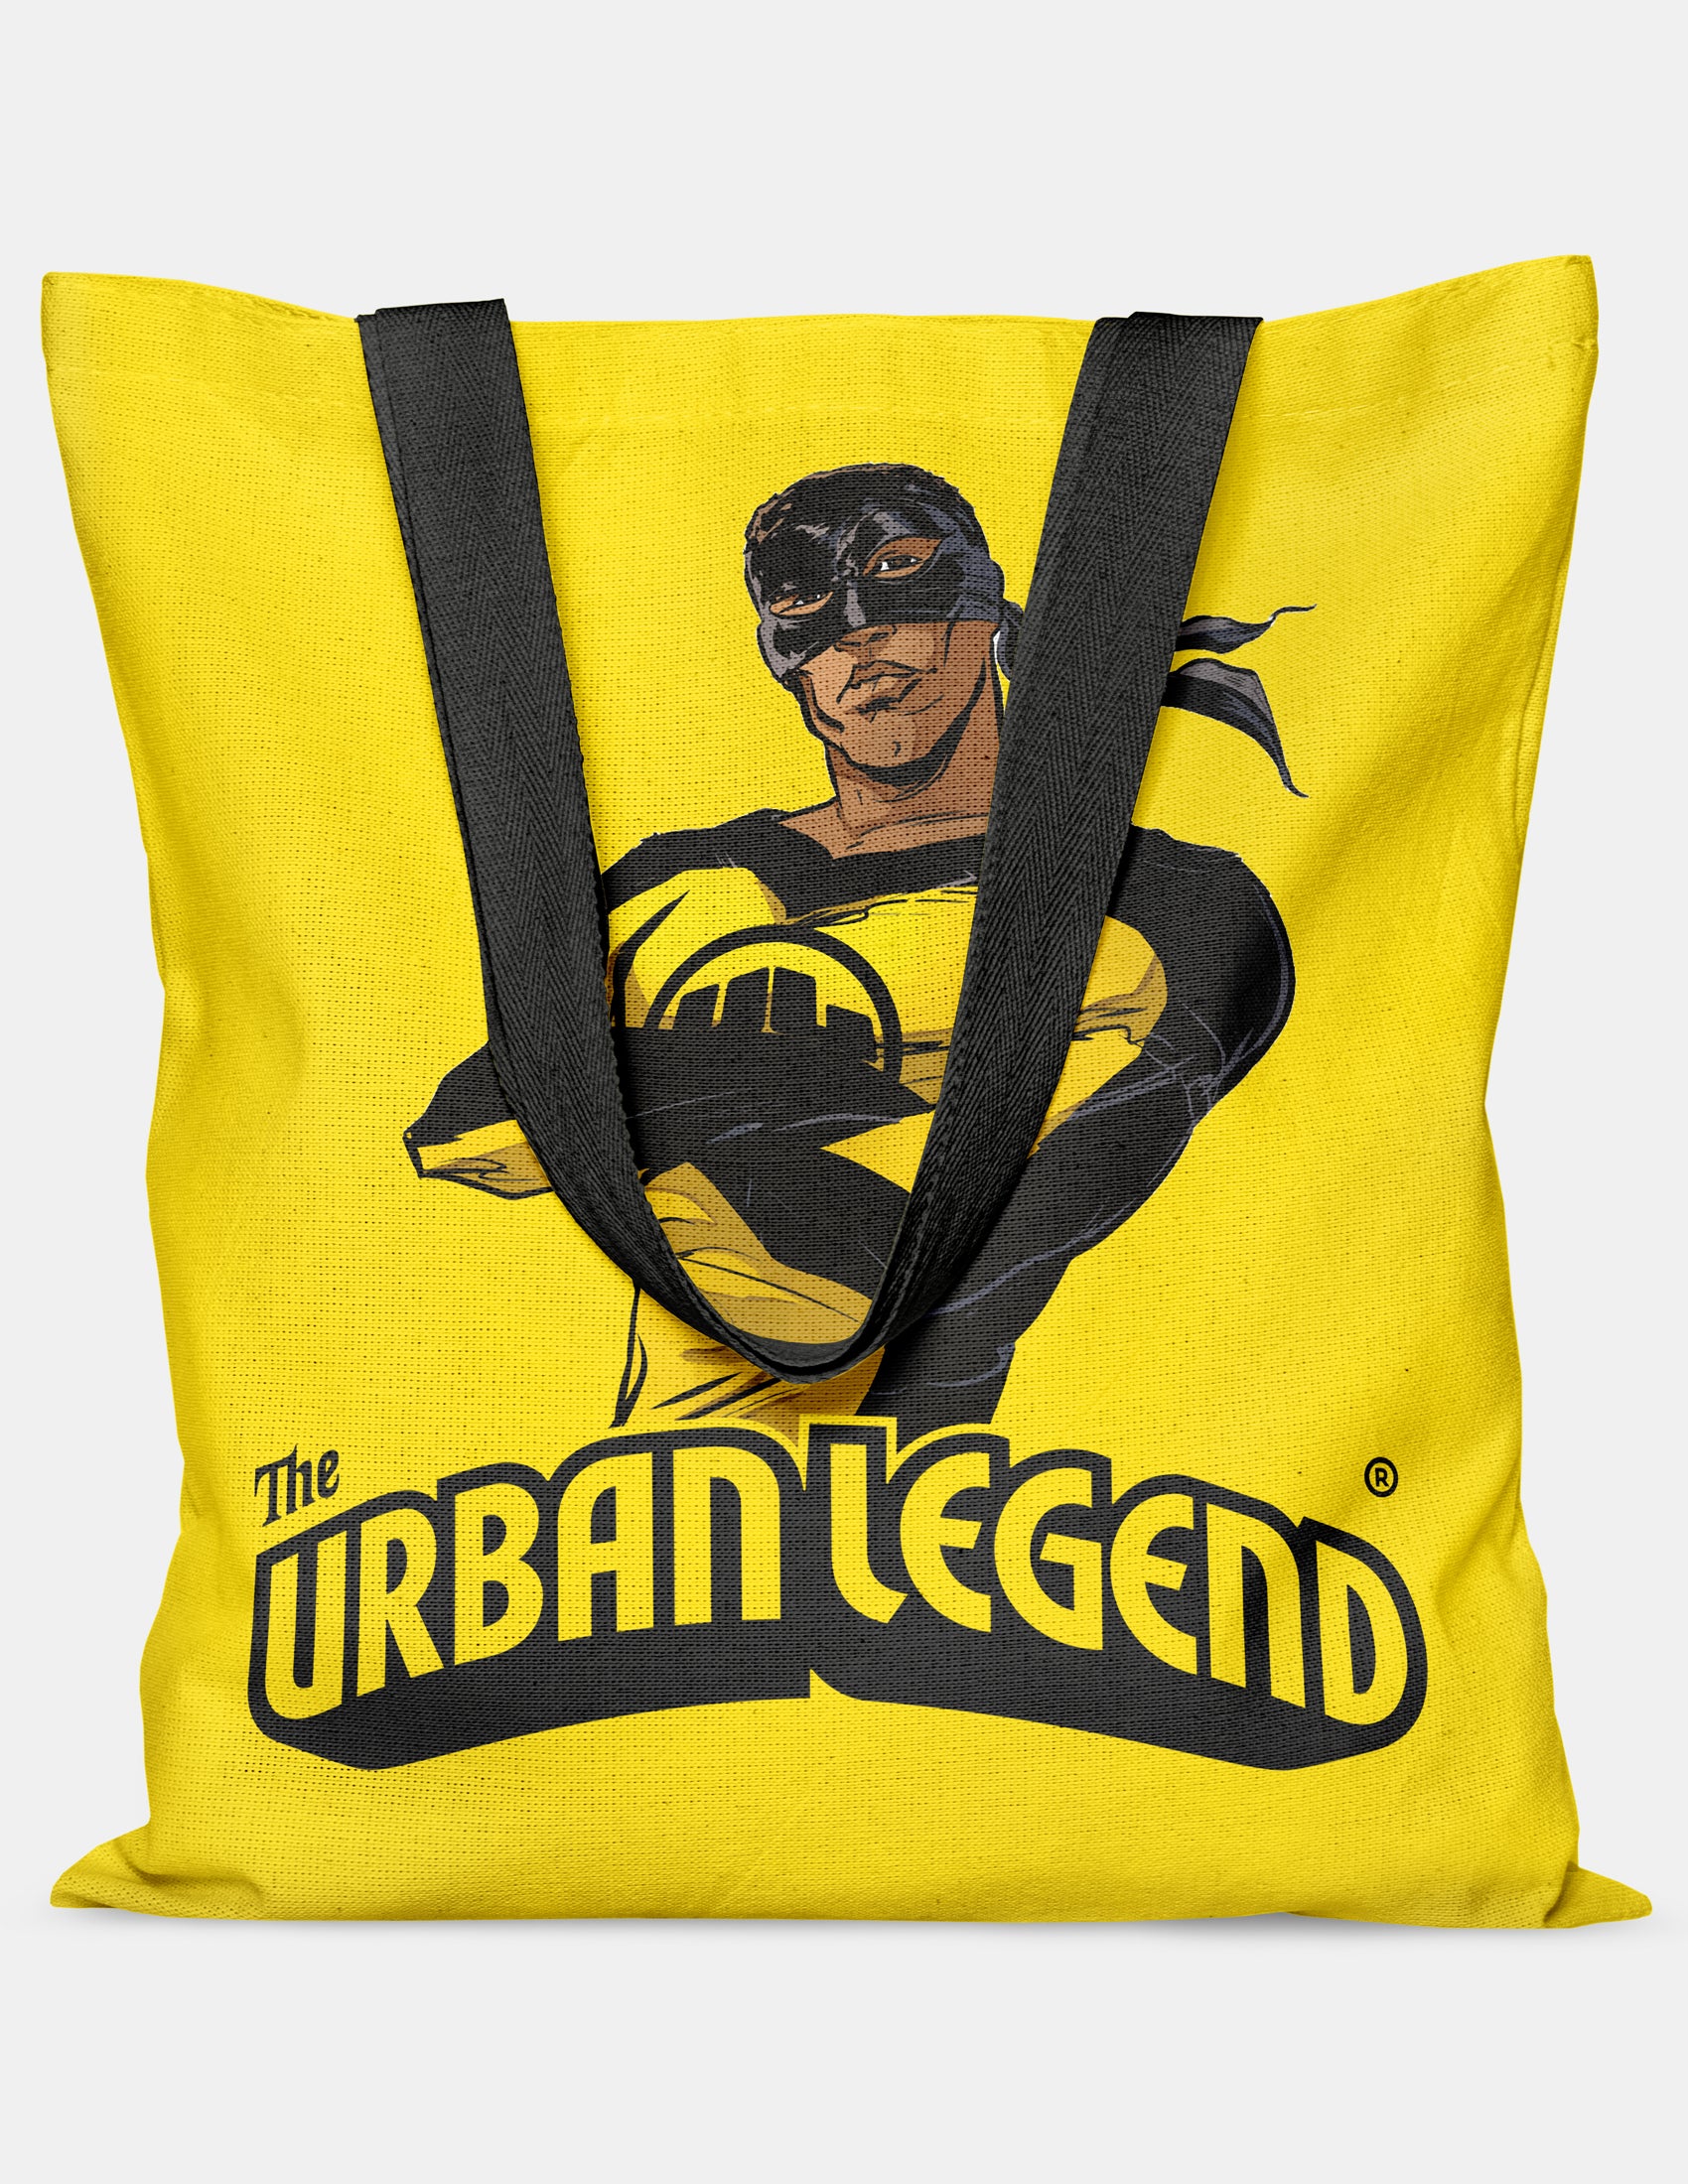 The Urban Legend  - Tote Bag (Yellow)